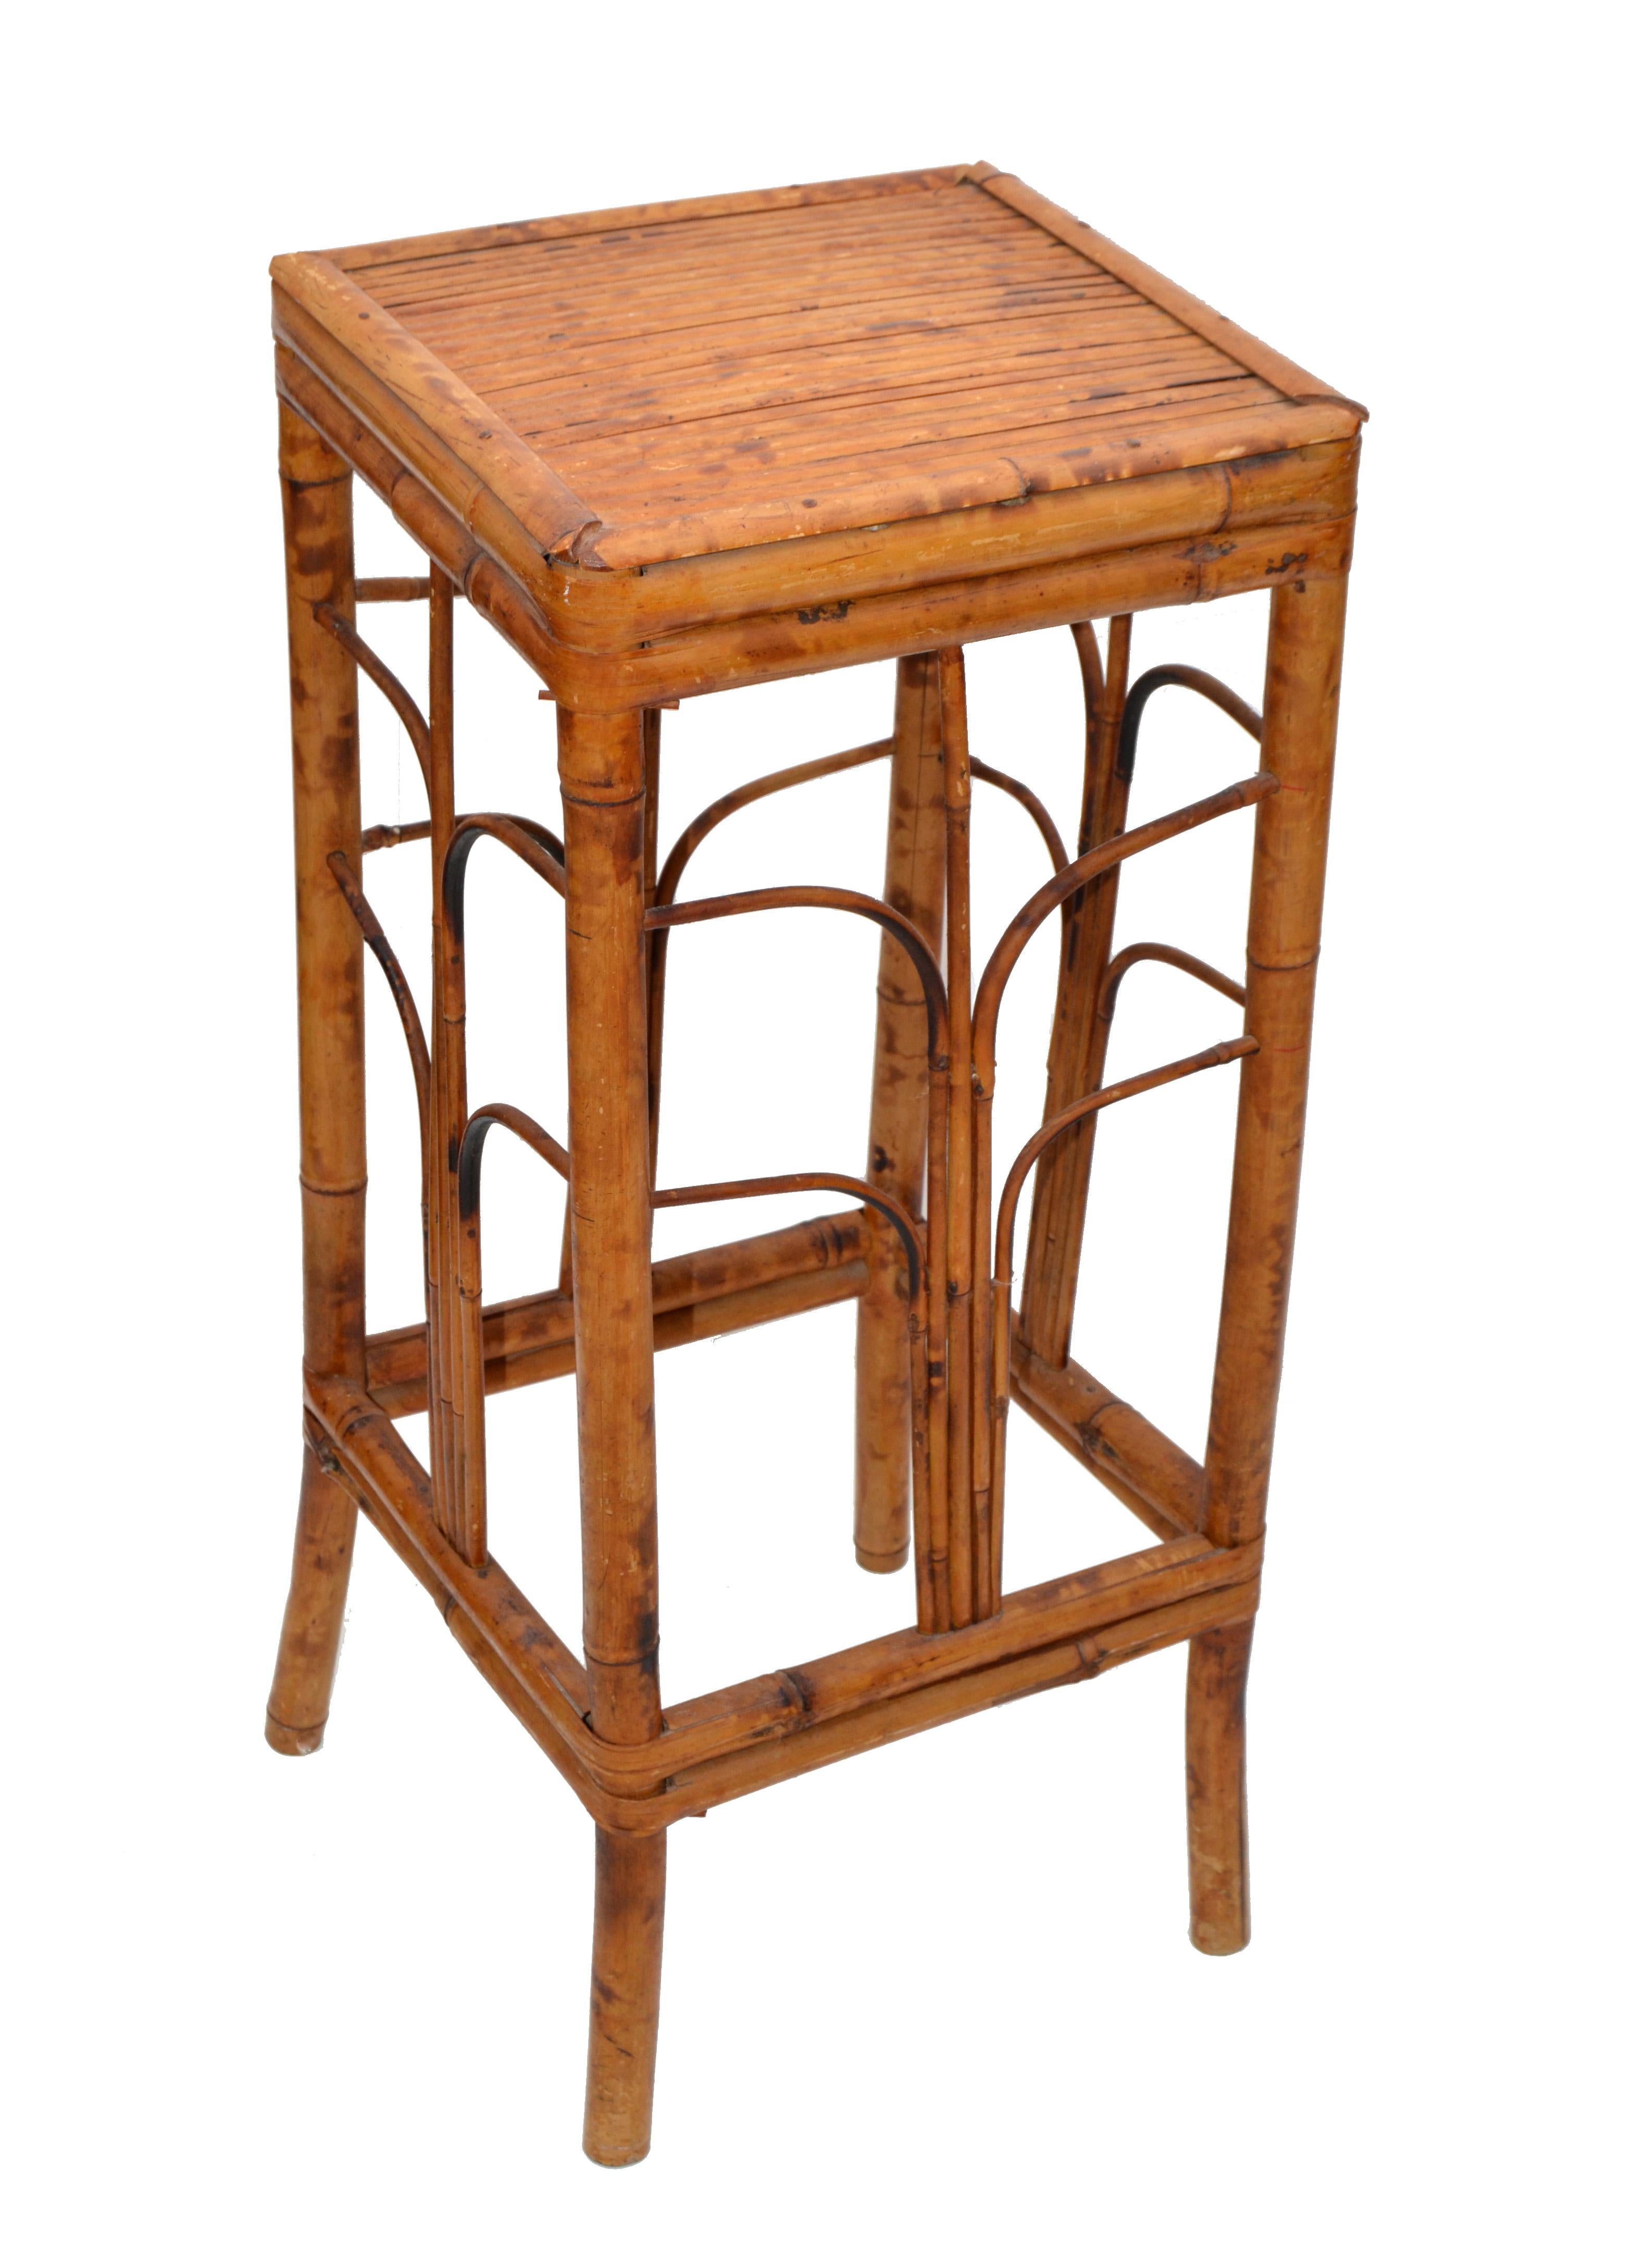 Decorative handcrafted and handwoven Bohemian style Mid-Century Modern bamboo and rattan side table and plant stand.
Great for your Florida style sunroom or porch.